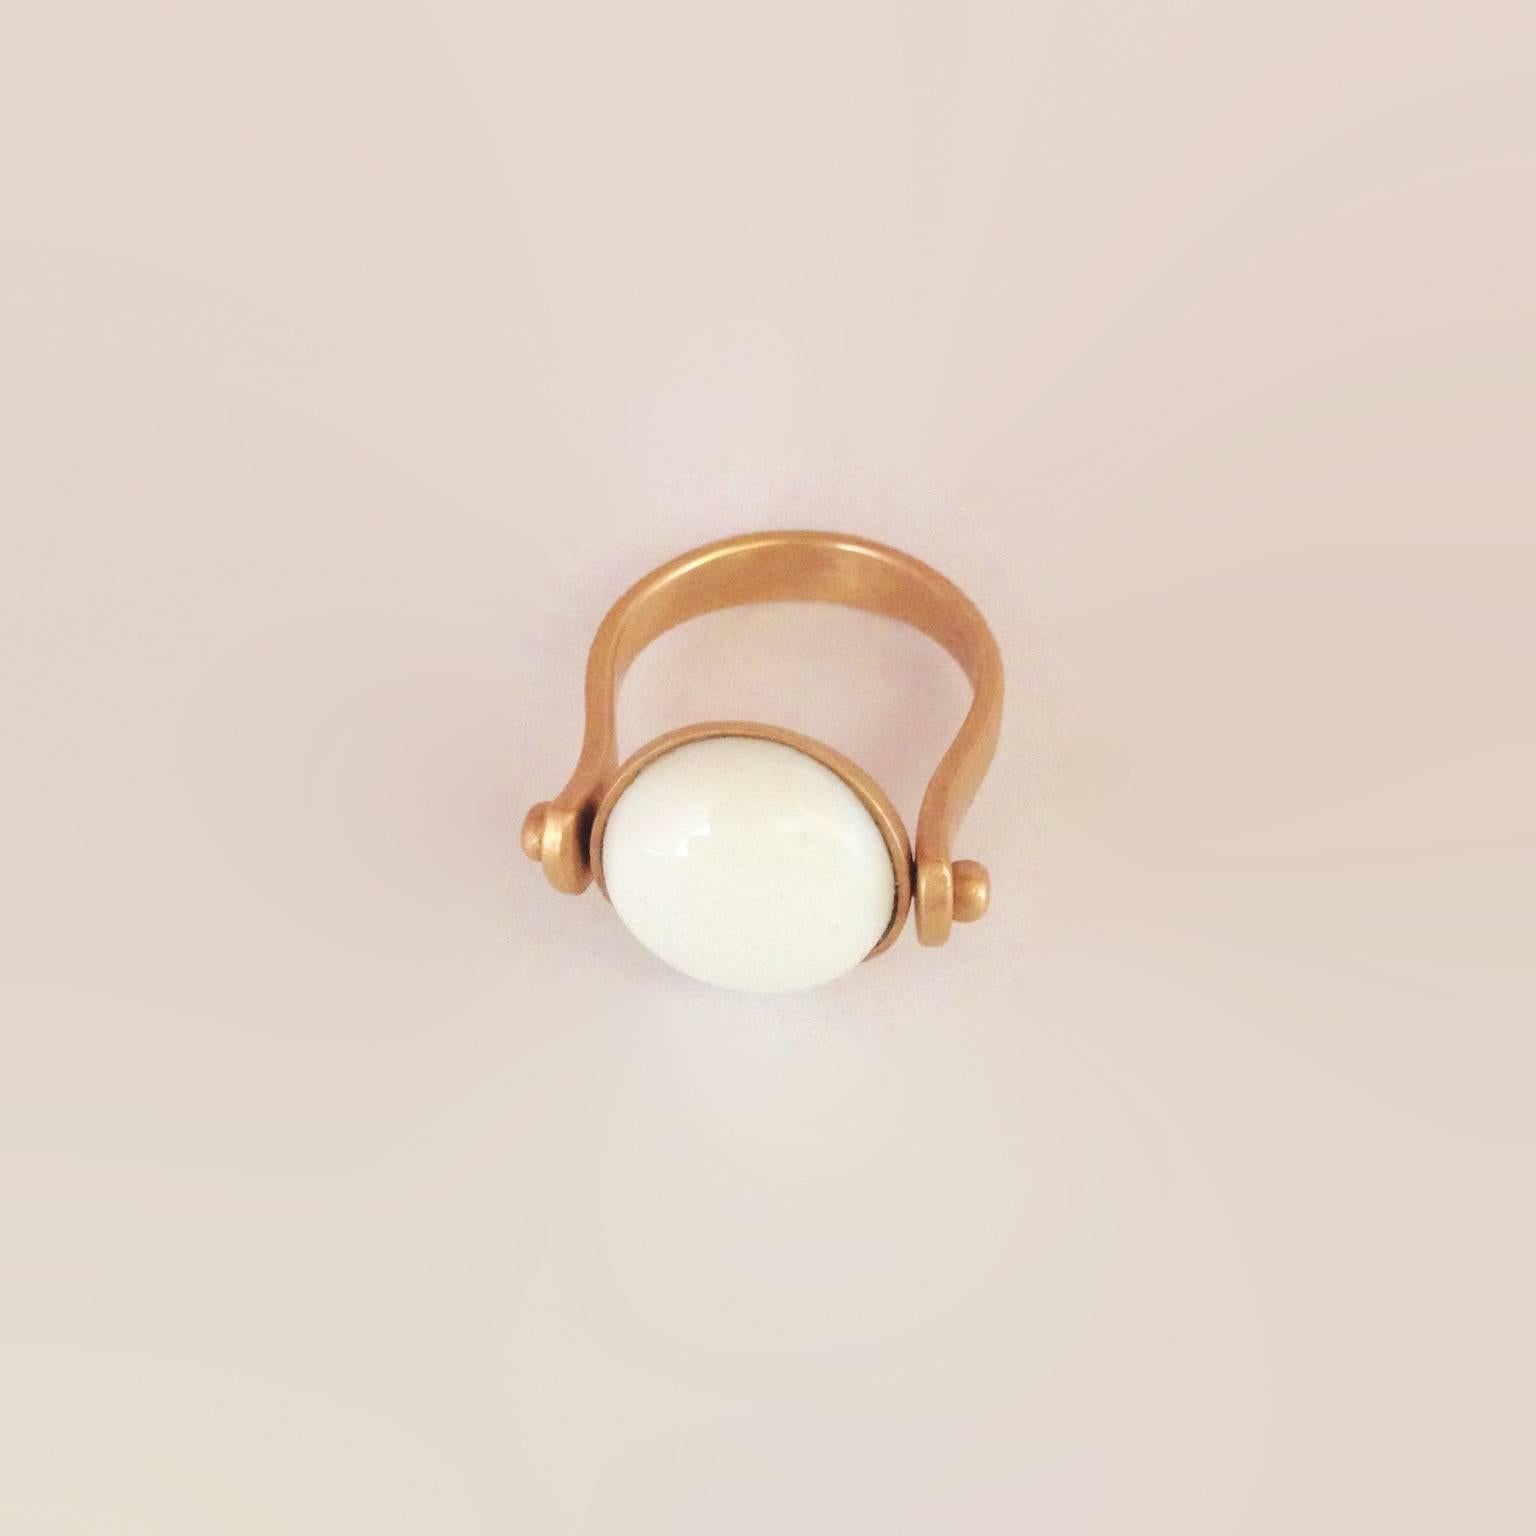 Handmade in Italy Roman Style Kogolong 18Kt Gold Reversible Ring
This ring is inspired by ancient Roman jewelry. They used to wear a ring where its head would be round. There's a white round kogolong as a button above and if you turn it around